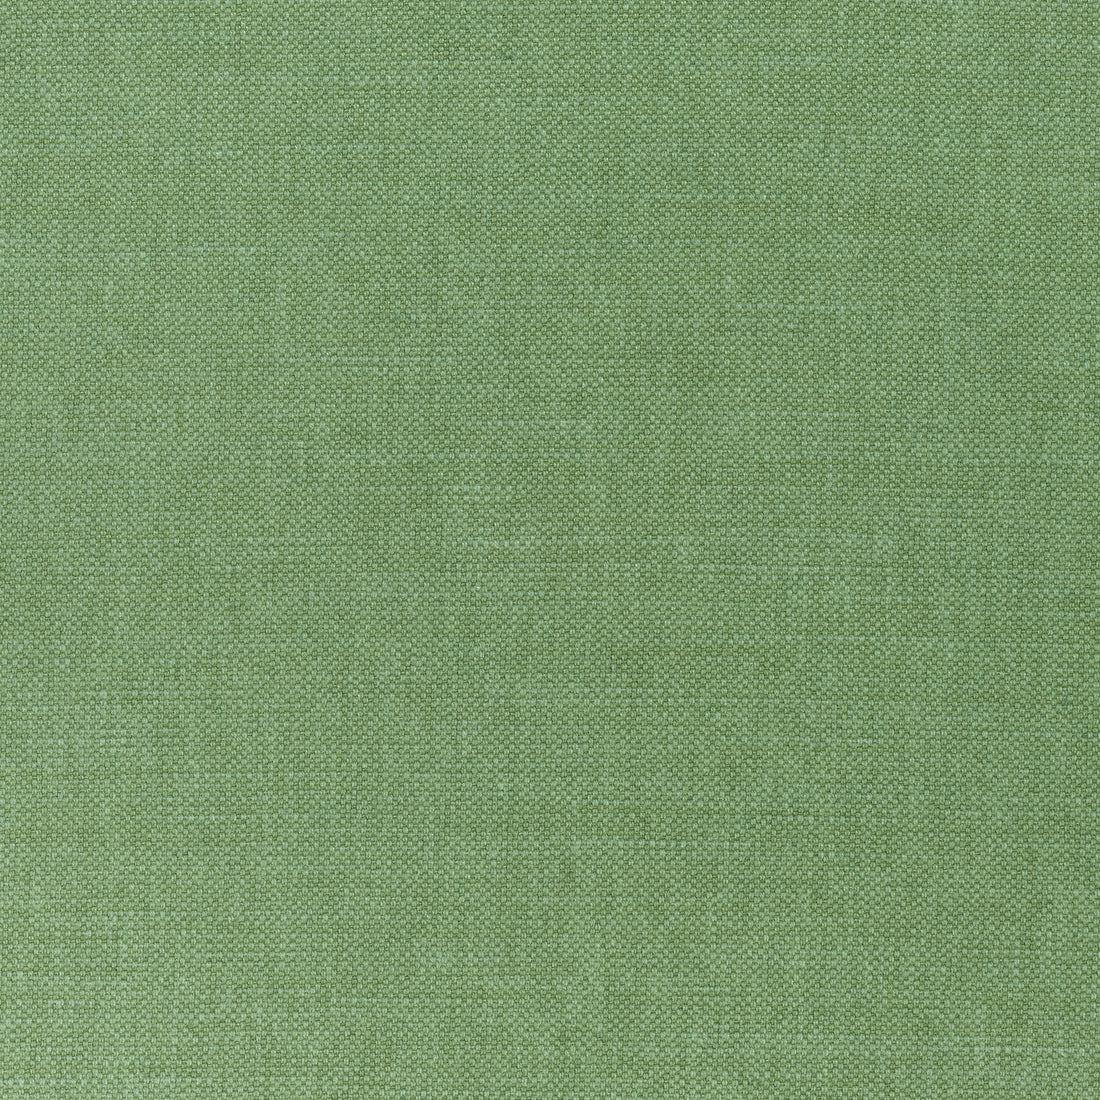 Prisma fabric in fern color - pattern number W70141 - by Thibaut in the Woven Resource Vol 12 Prisma Fabrics collection